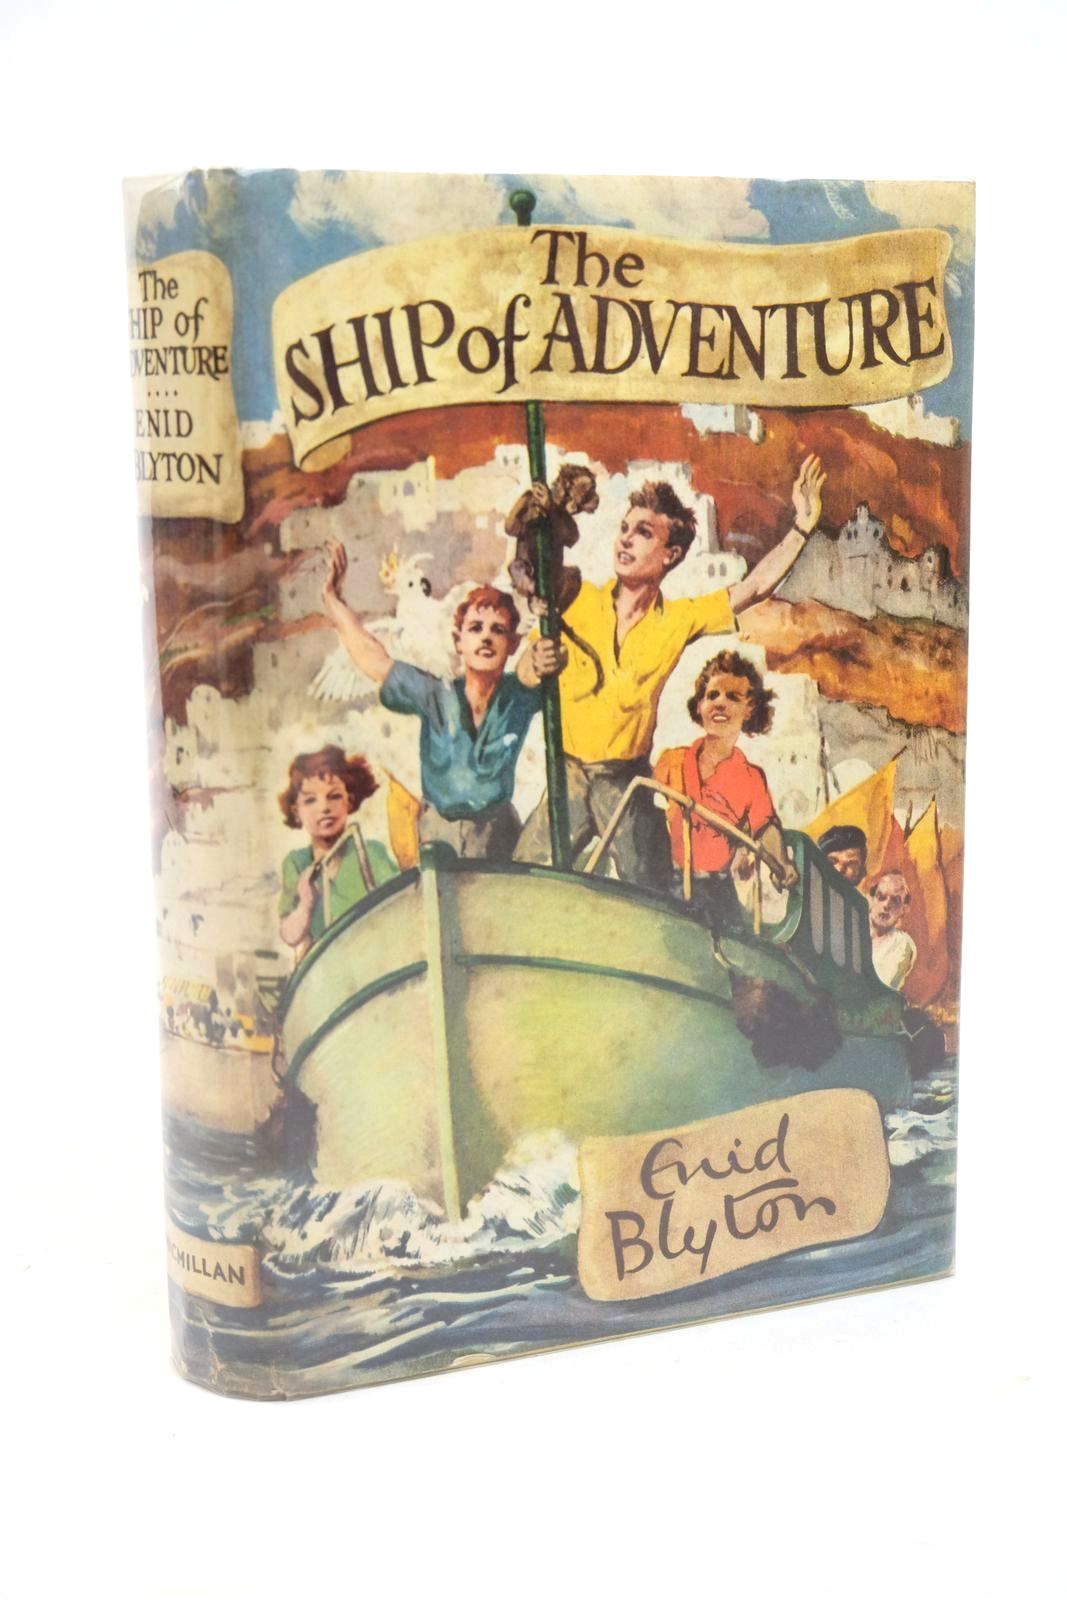 Photo of THE SHIP OF ADVENTURE written by Blyton, Enid illustrated by Tresilian, Stuart published by Macmillan &amp; Co. Ltd. (STOCK CODE: 1323158)  for sale by Stella & Rose's Books